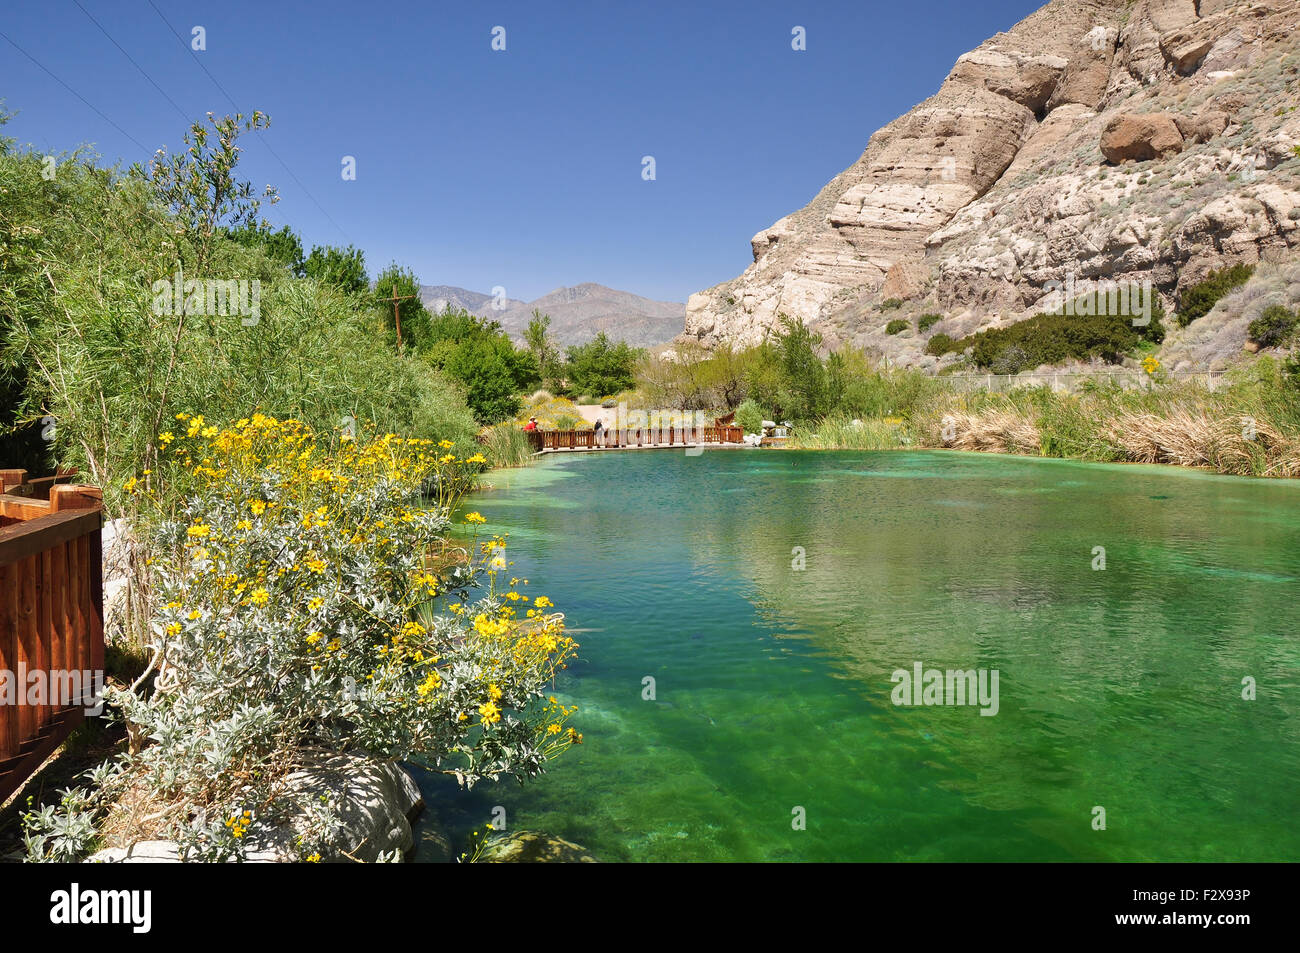 View of a large pond in Whitewater Canyon near the desert town of Palm Springs, California. Stock Photo